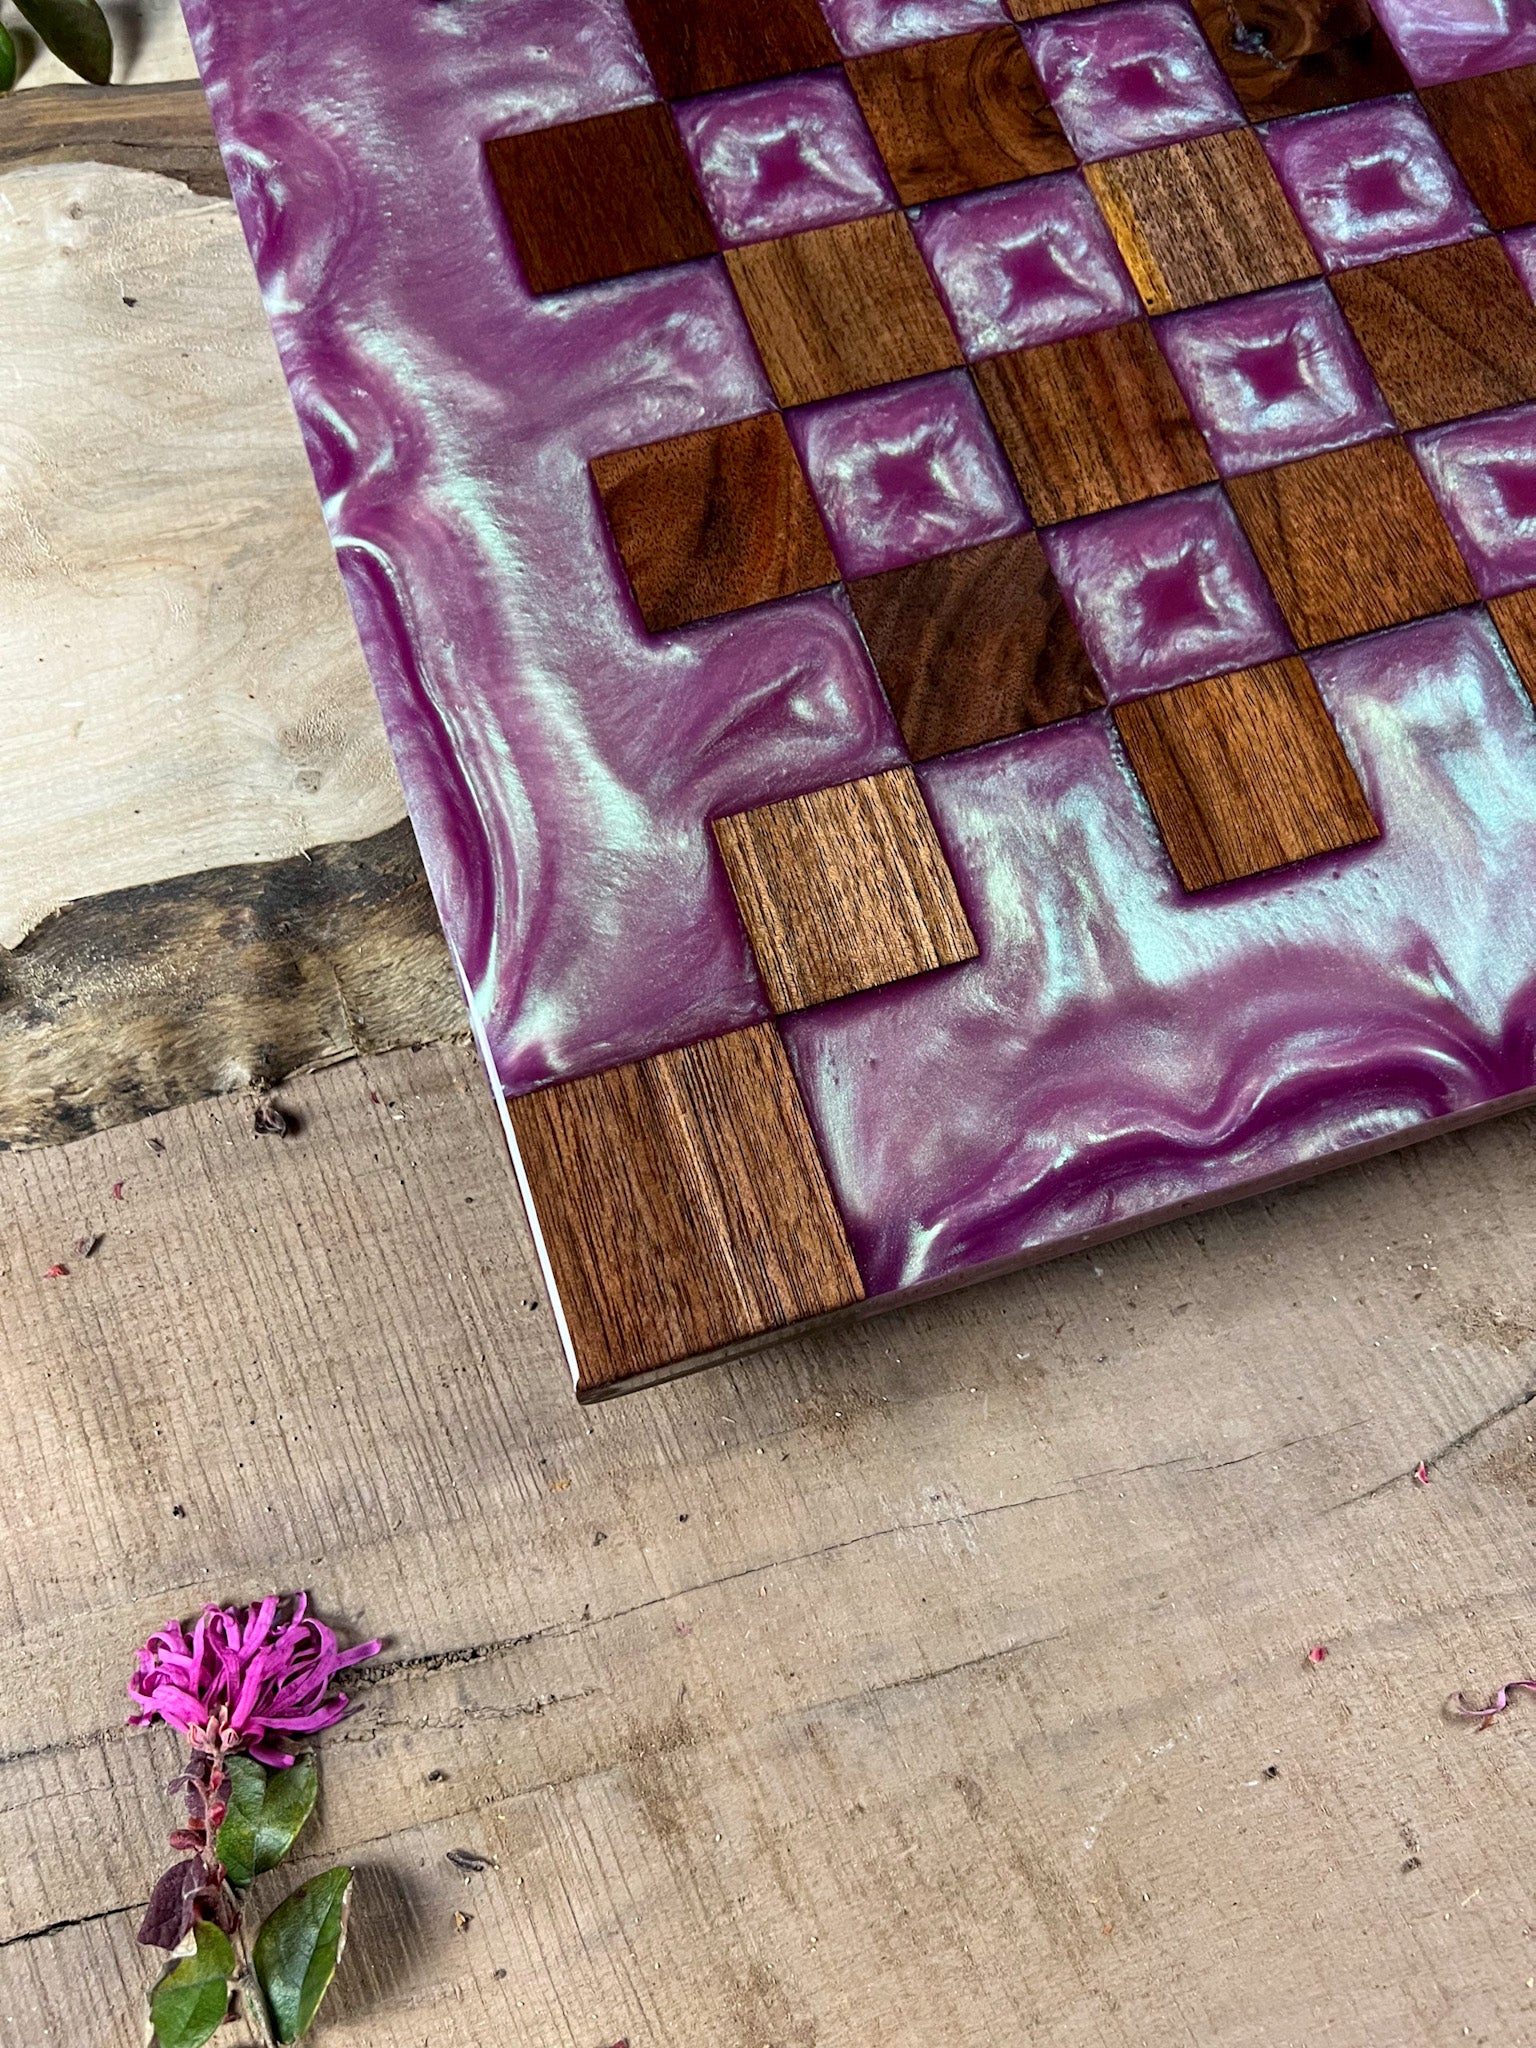 Aphrodite's Obsession Walnut Chess Board (Chameleon Color Shifting)